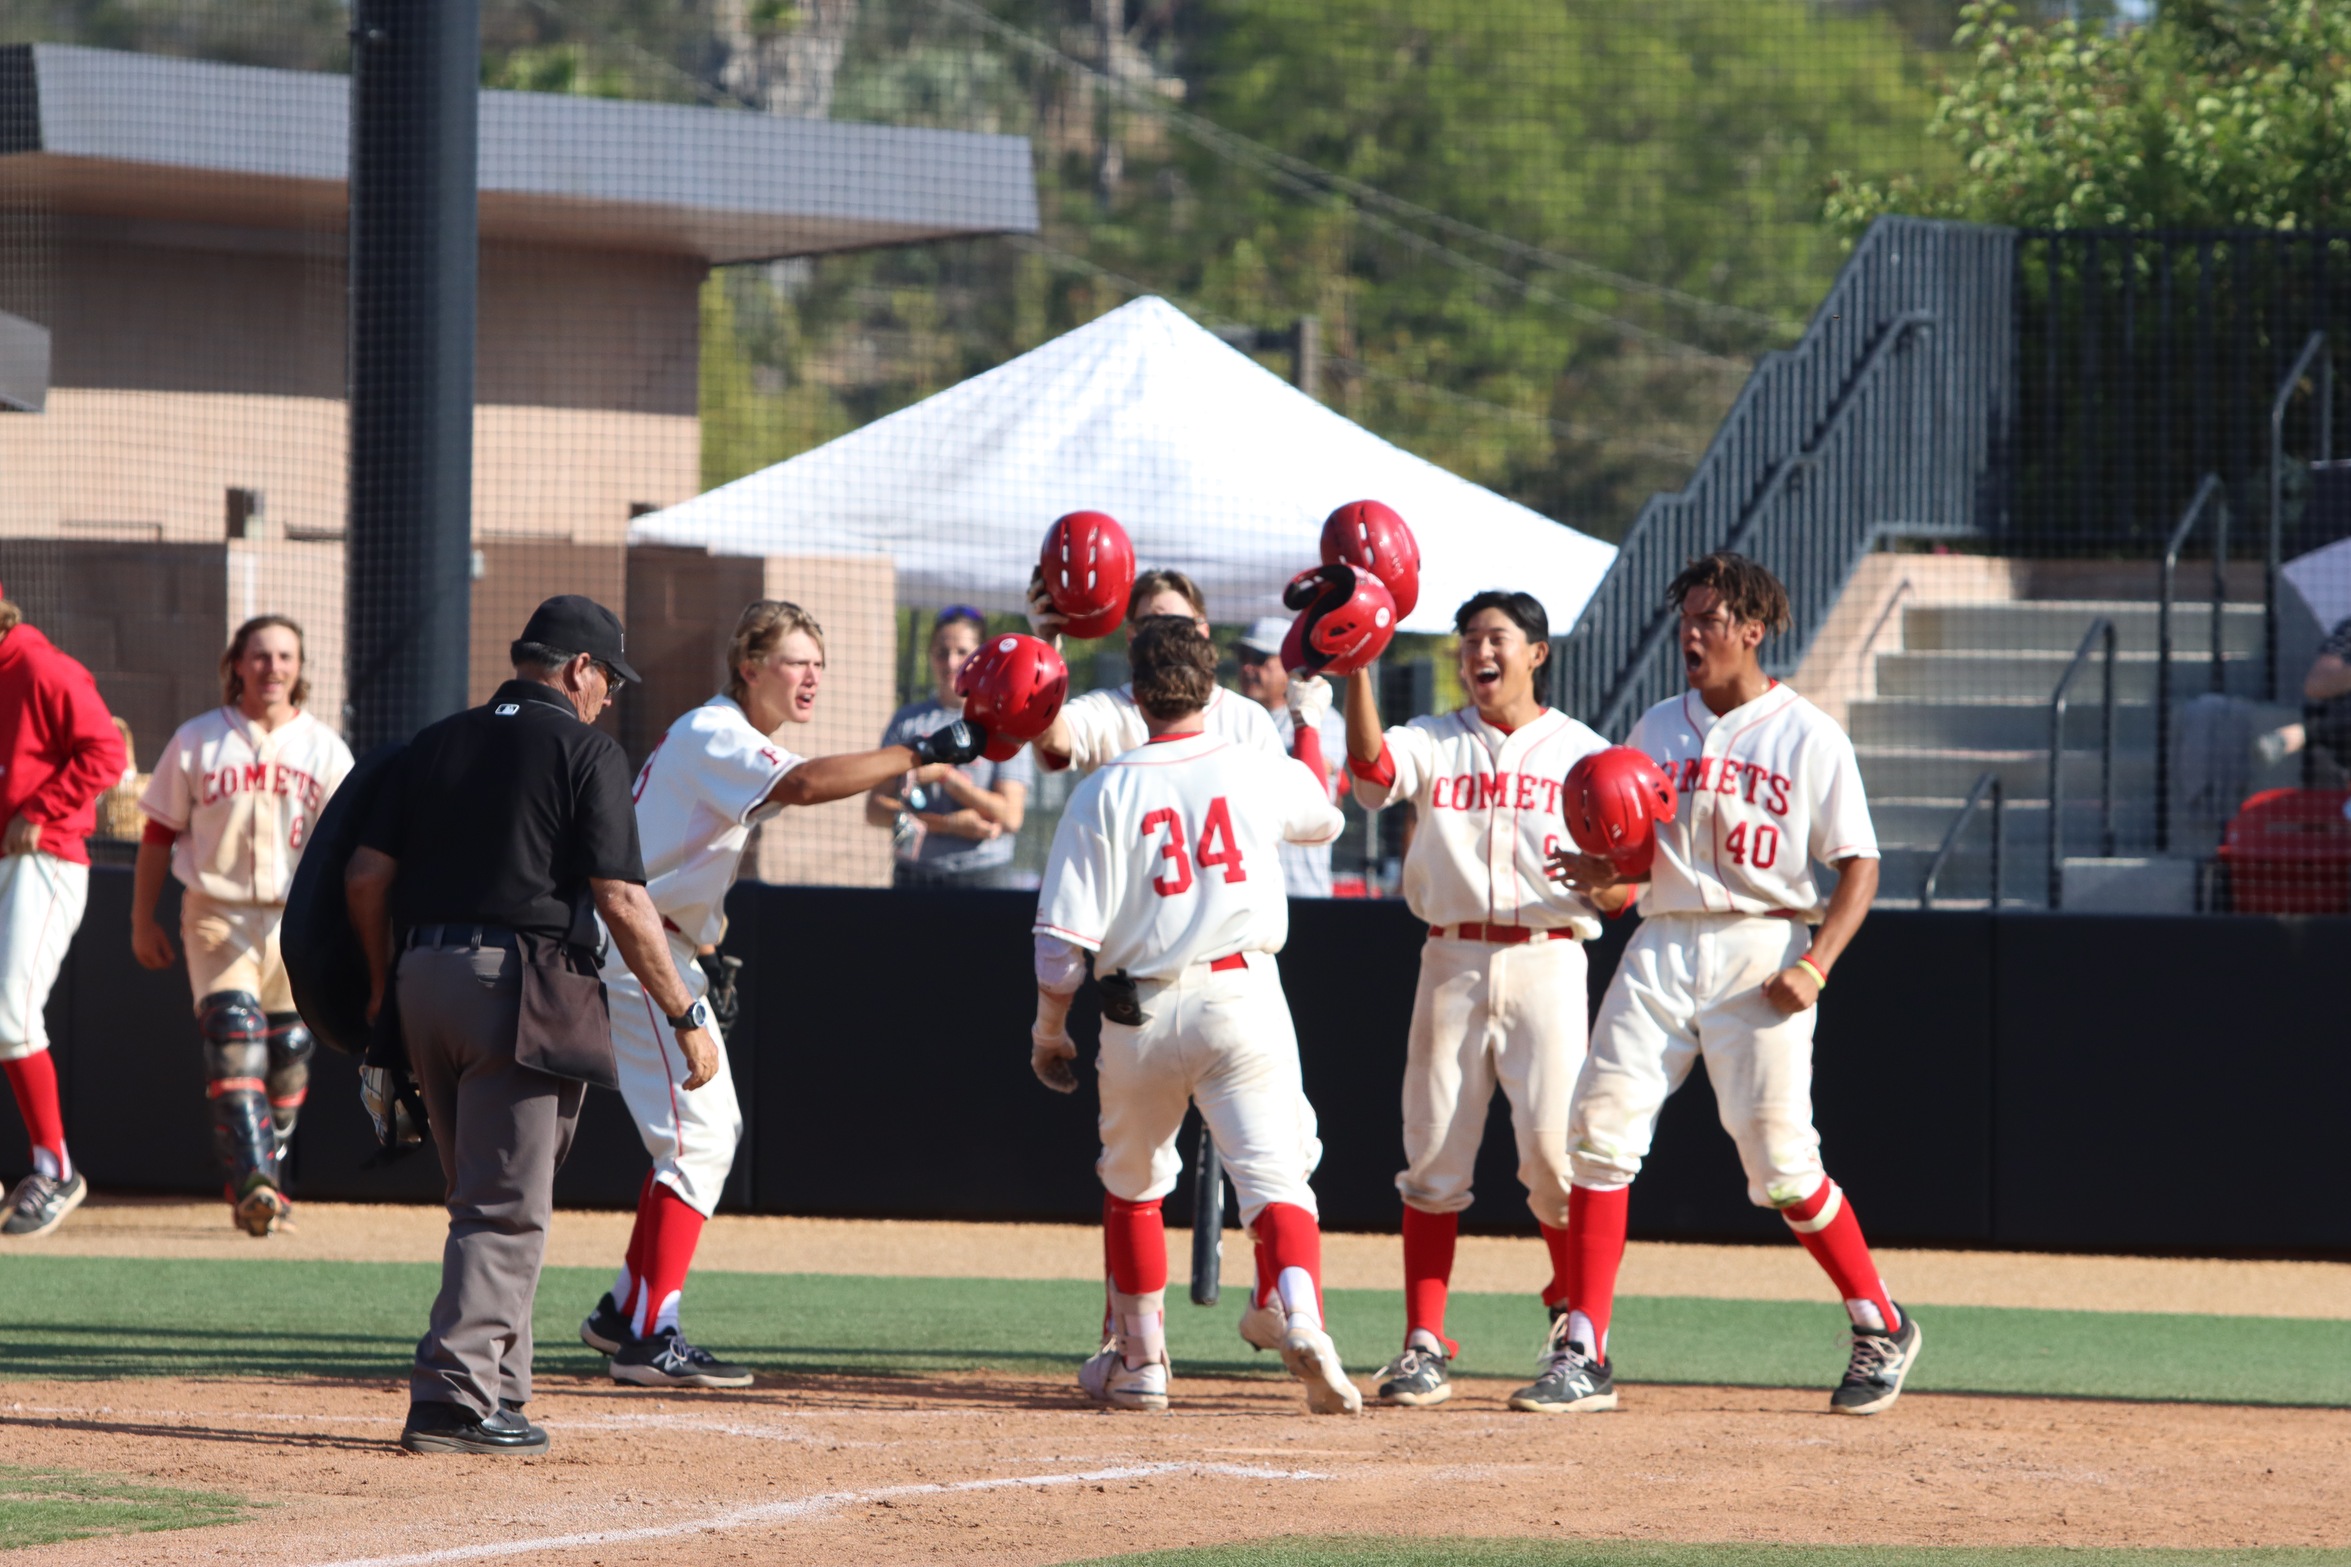 Tanner Lappin hit a 3-run bomb in the sixth inning of game three. Photo by Hugh Gerhardt.